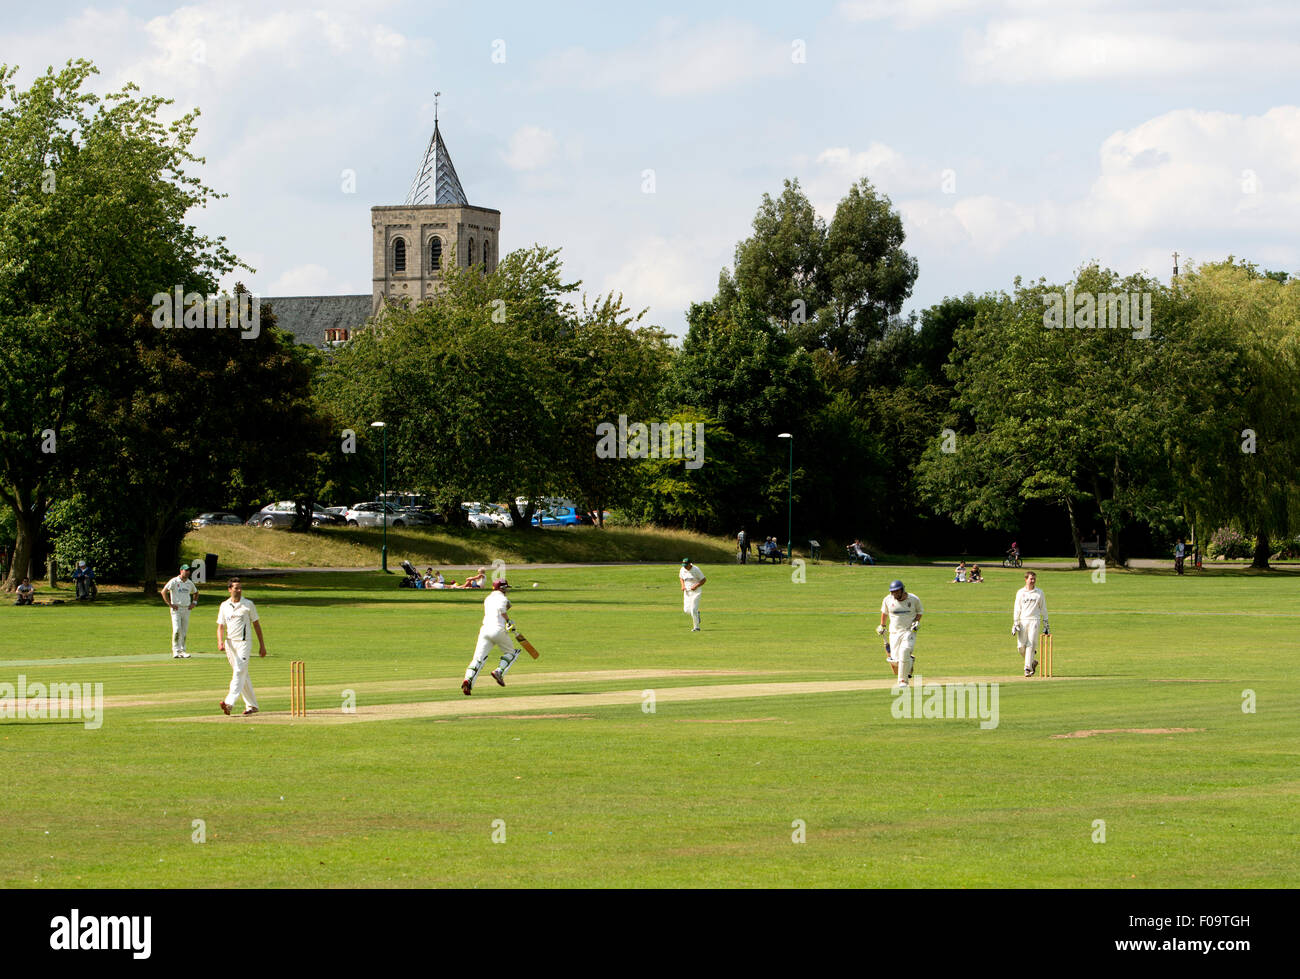 Cricket on the Bath Grounds, Ashby-de-la-Zouch, Leicestershire, England, UK Stock Photo